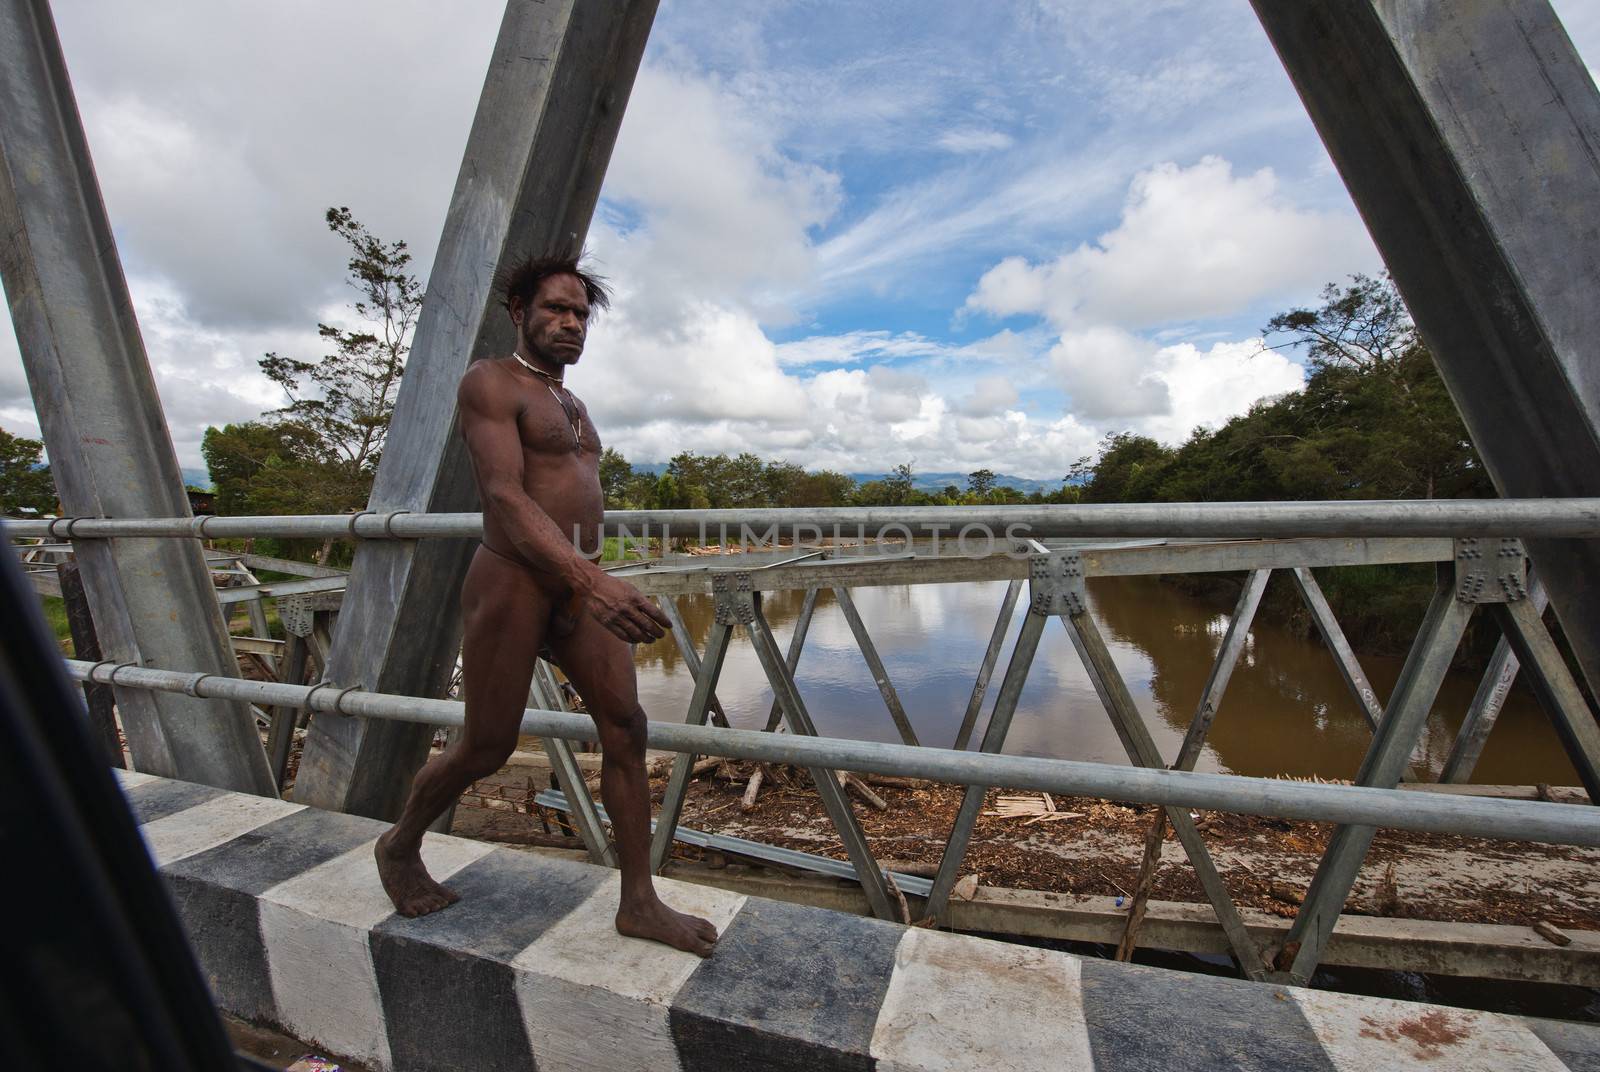 WAMENA, PAPUA, INDONESIA - JUNE, 20:The naked Papuan man goes on the asphalted road on June, 20, 2012 near Wamena, Papua, Indonesia.